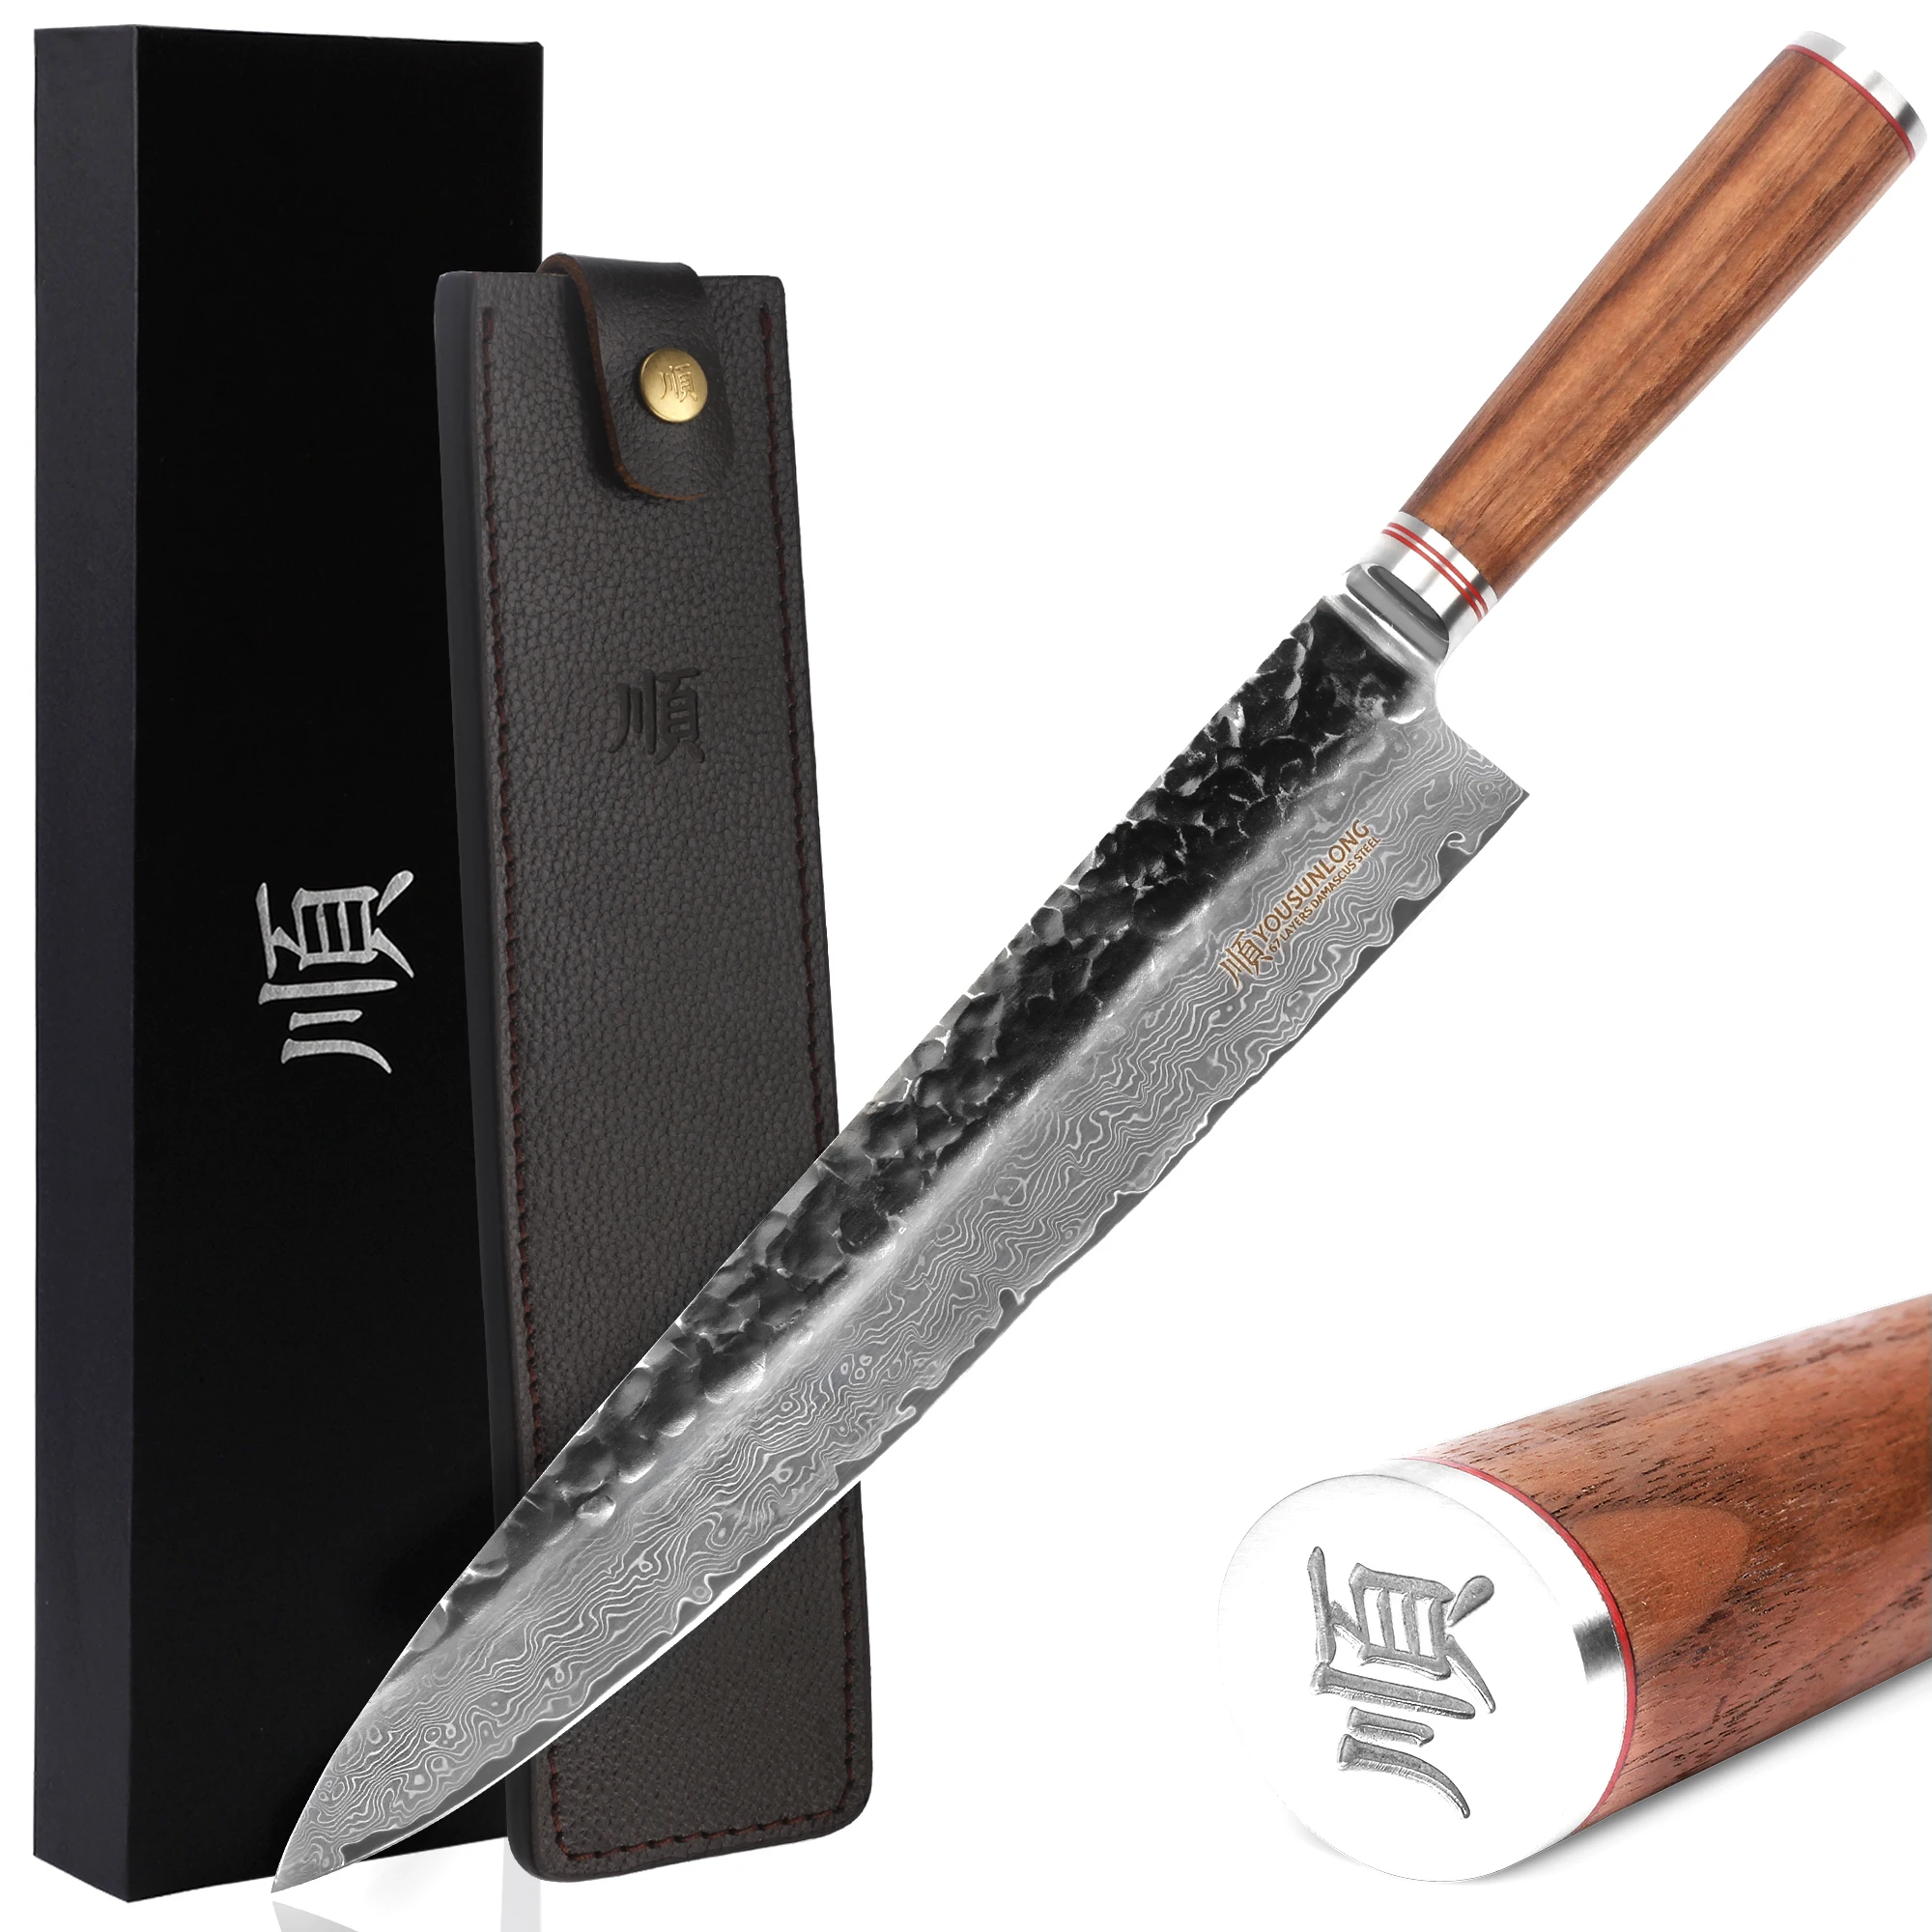 

YOUSUNLONG Chef's Knives 12 inch Max Gyuto Japanese Hammered Damascus Steel Natural Walnut Wooden Handle with Leather Sheath